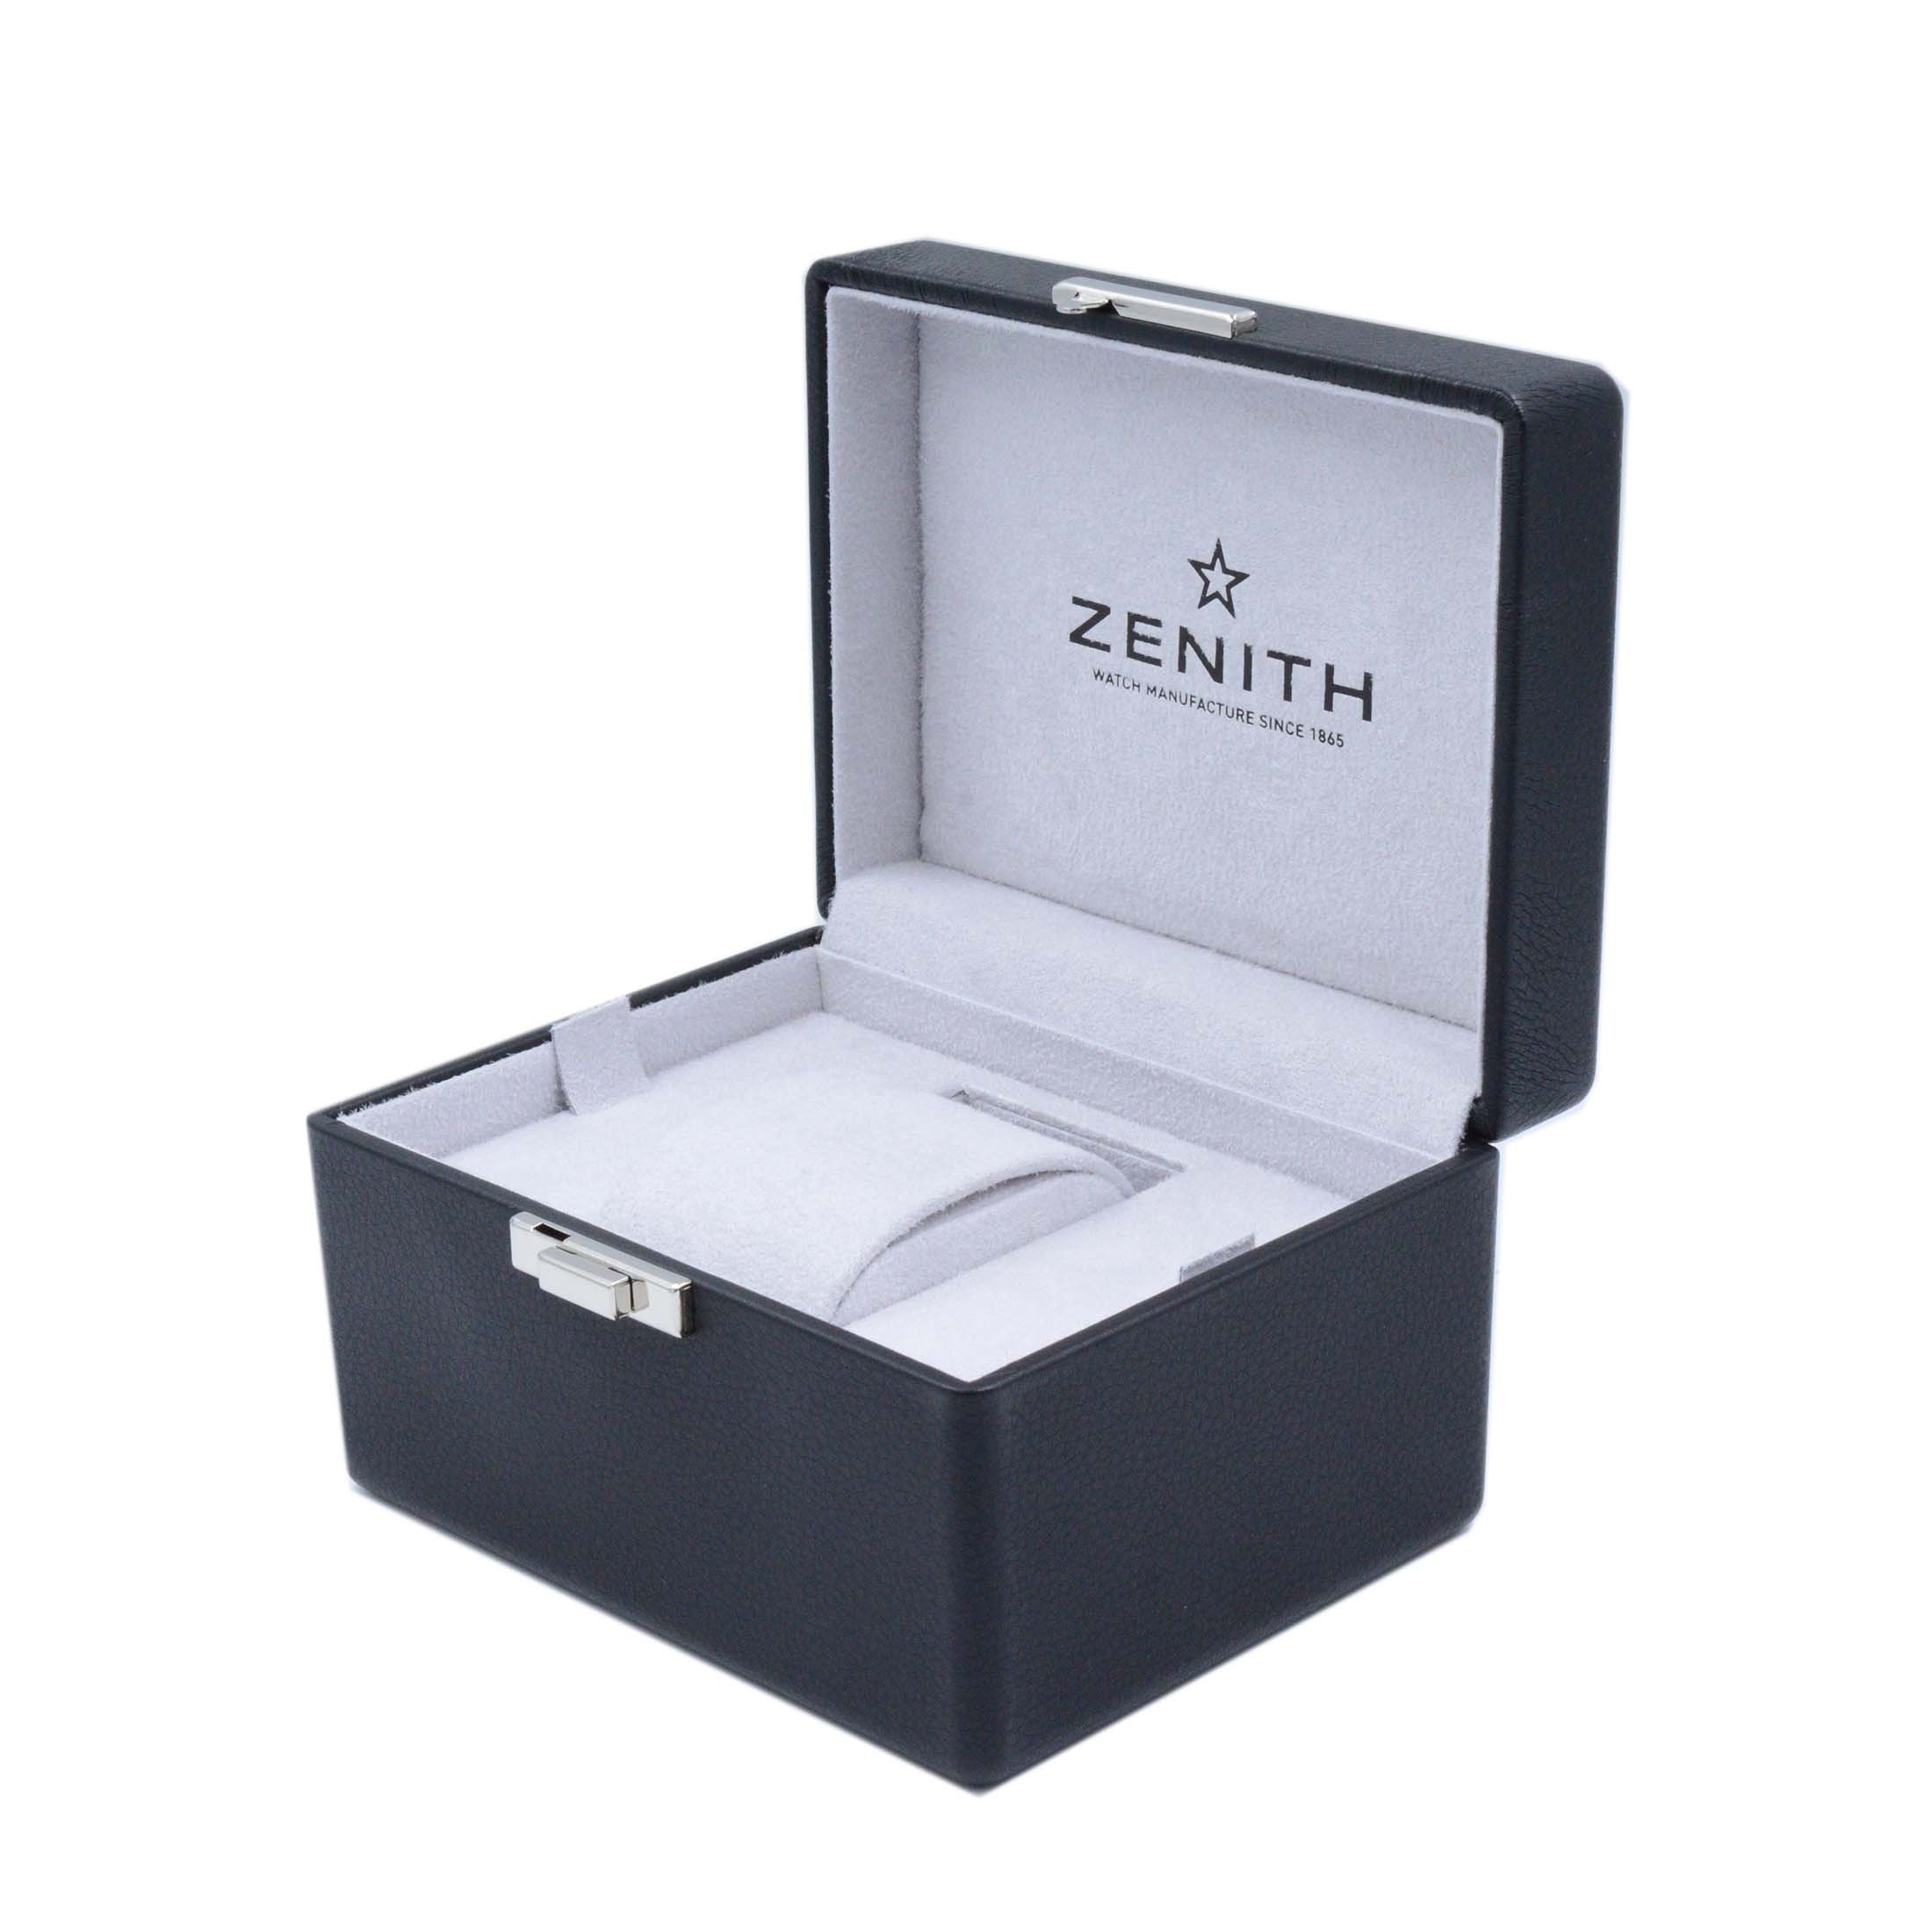 Zenith Captain Moonphase Silver Dial Automatic Mens Watch 03214369101C498